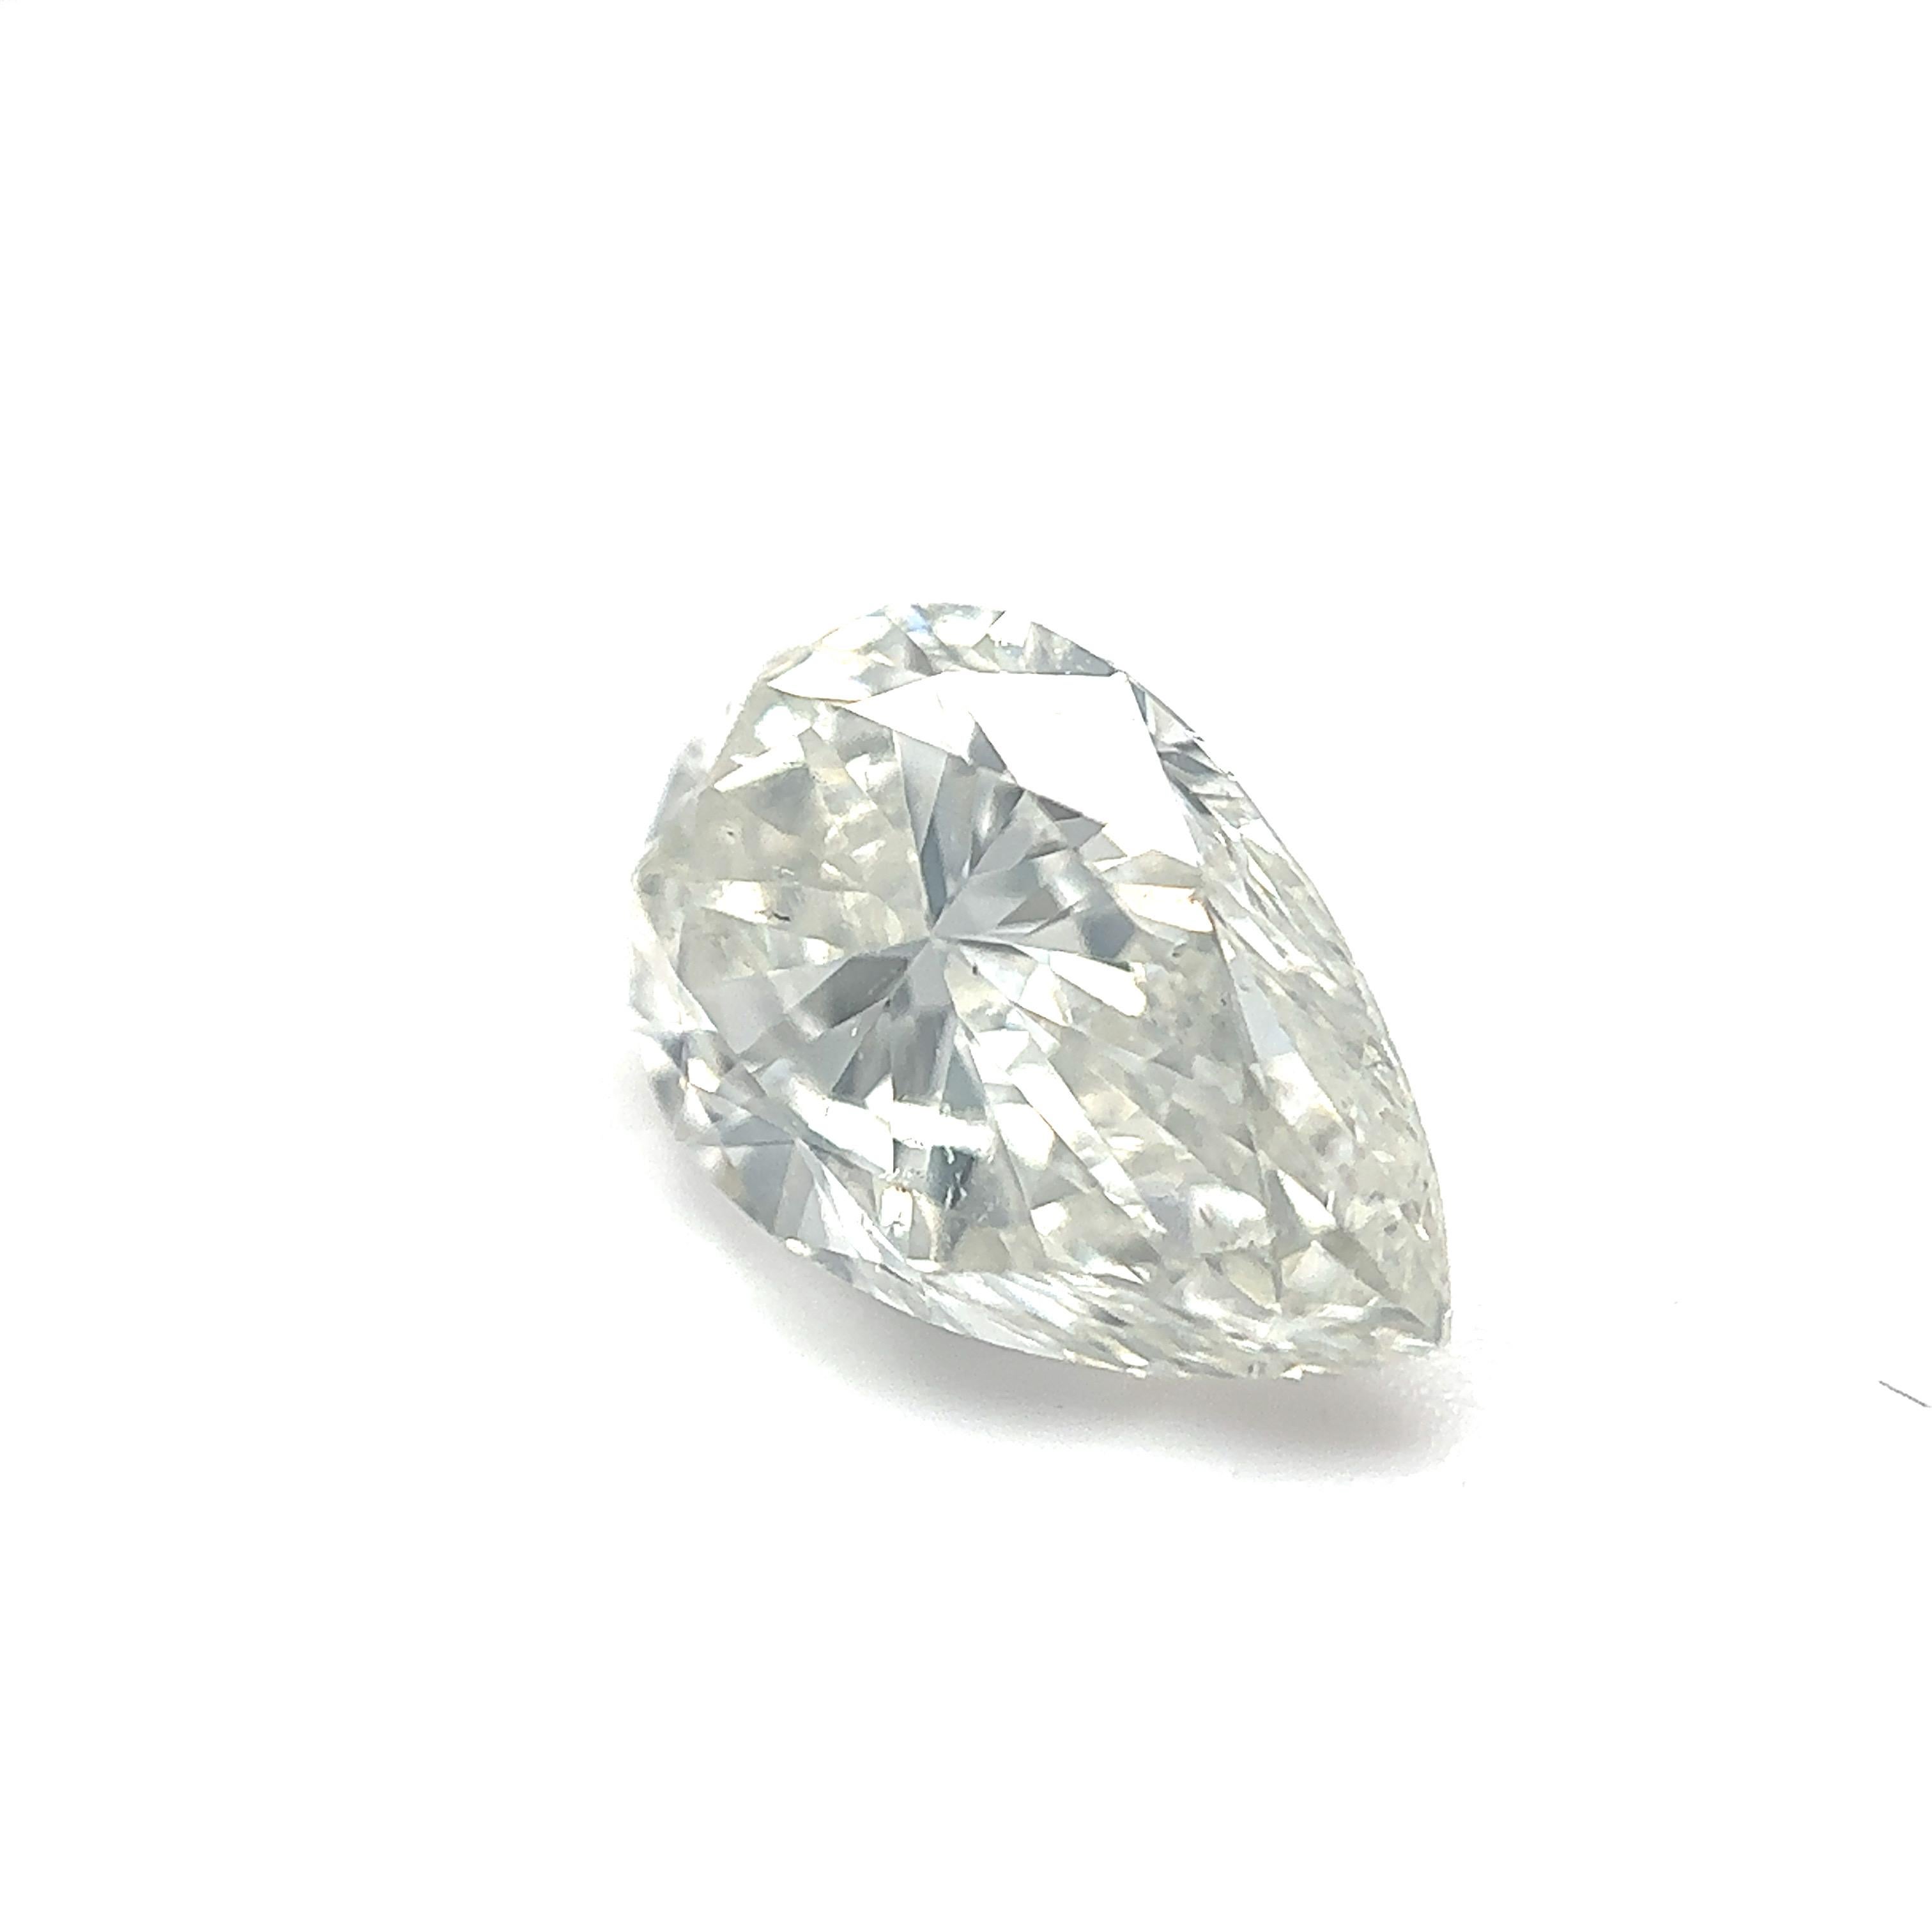 GIA Certified 1.70 Carat Pear Brilliant Natural Diamond Loose stone (Customization Option)

Color: H
Clarity: SI2

Ideal for engagement rings, wedding bands, diamond necklaces and diamond earrings. Get in touch with us to customise your jewellery!